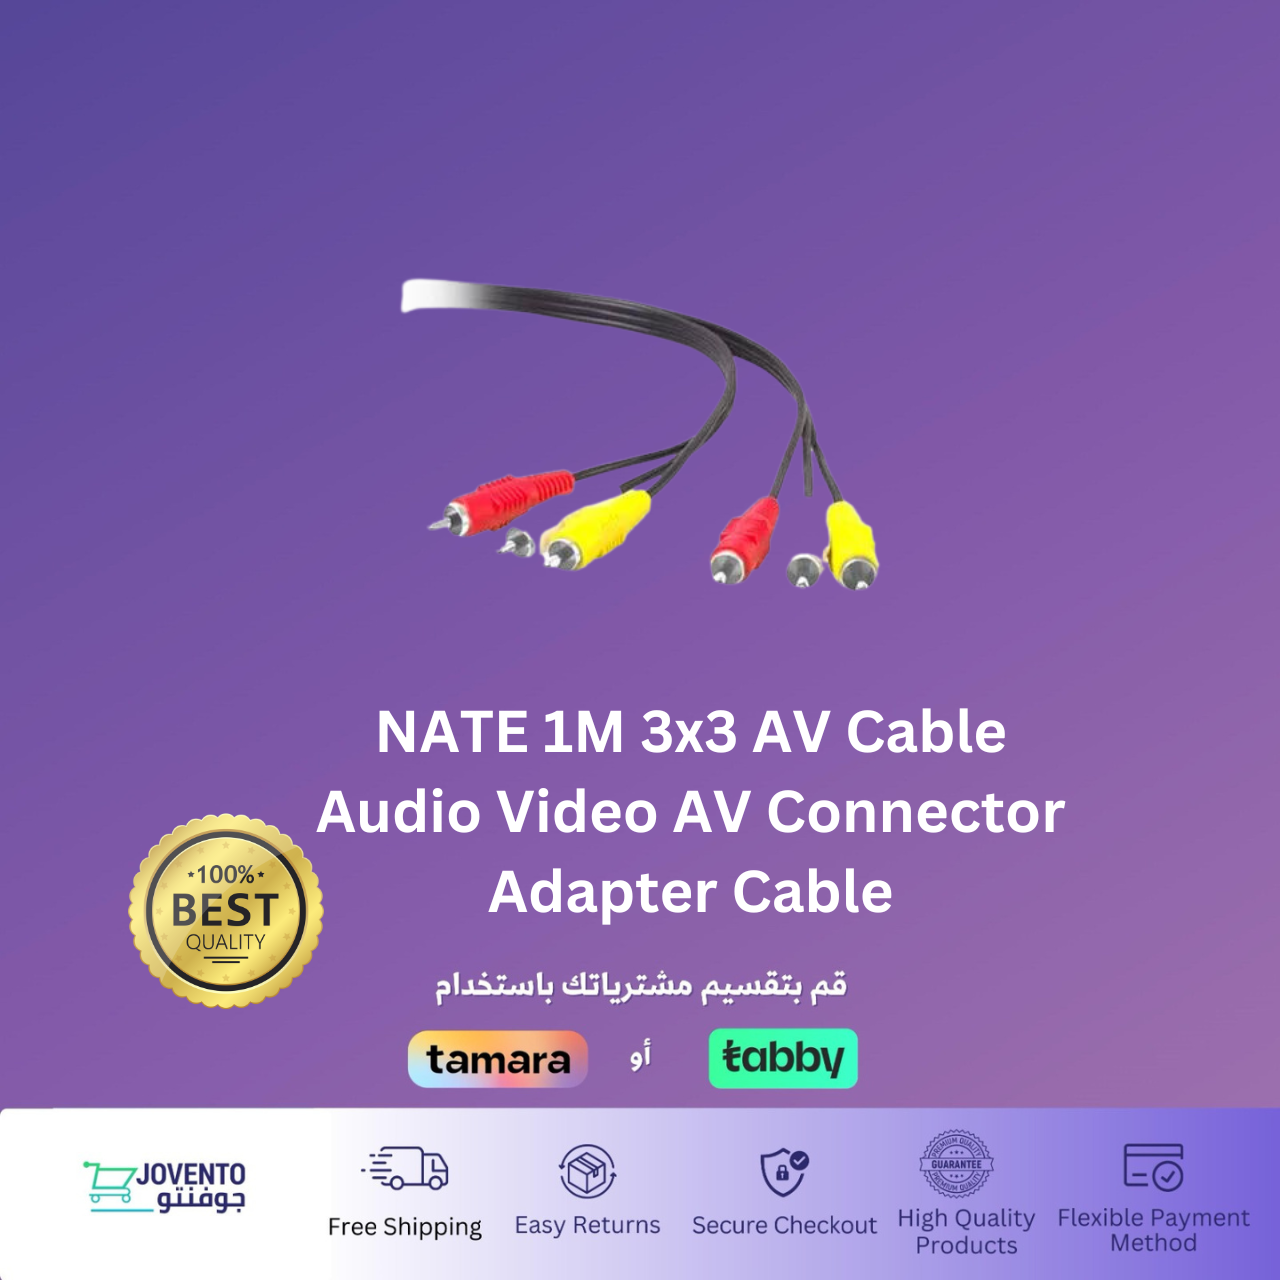 NATE 1M 3x3 AV Cable Audio Video AV Connector Adapter Cable